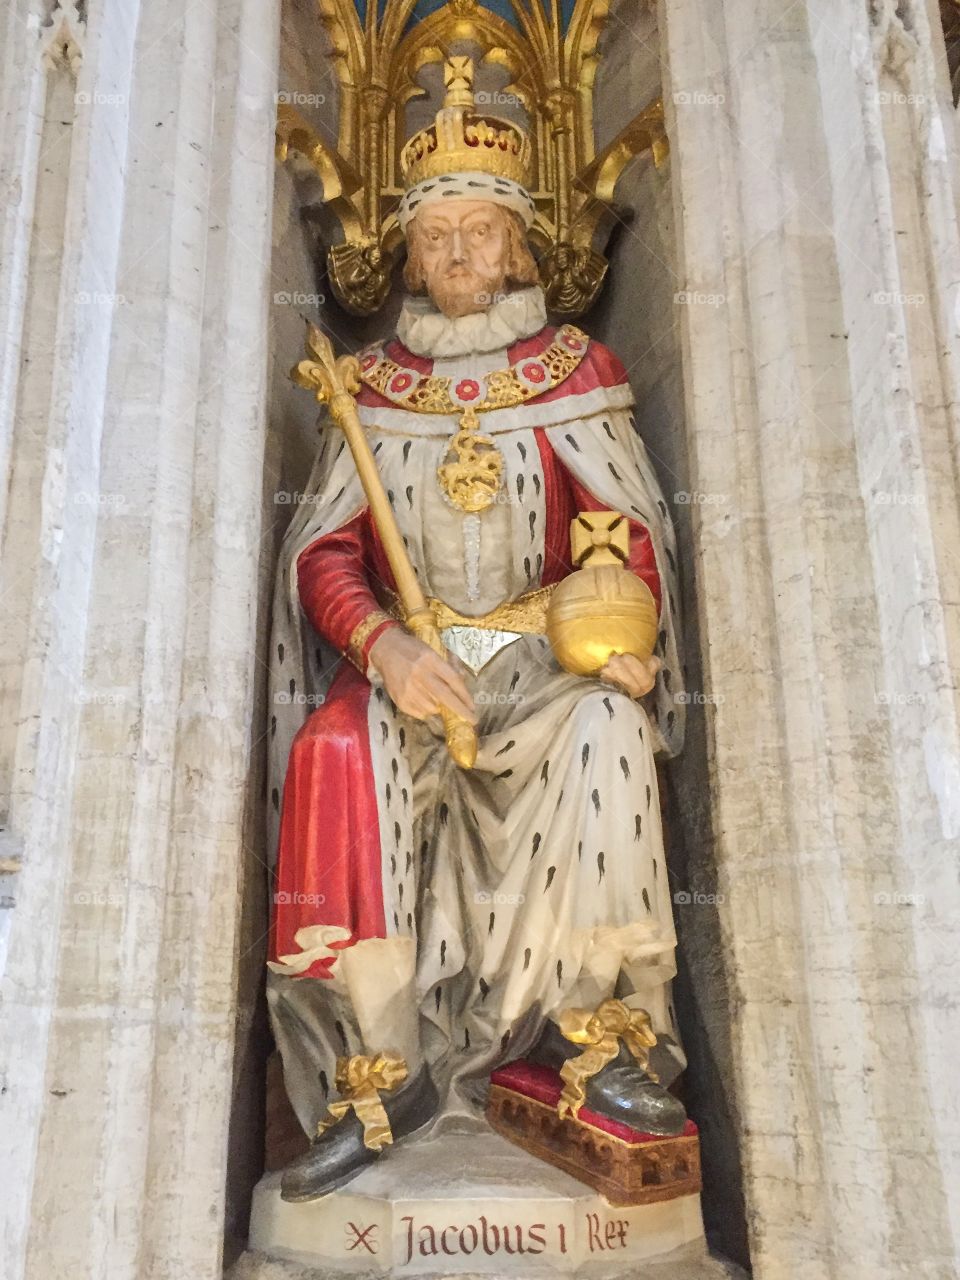 Statue of King James I of England, from Ripon Cathedral in England